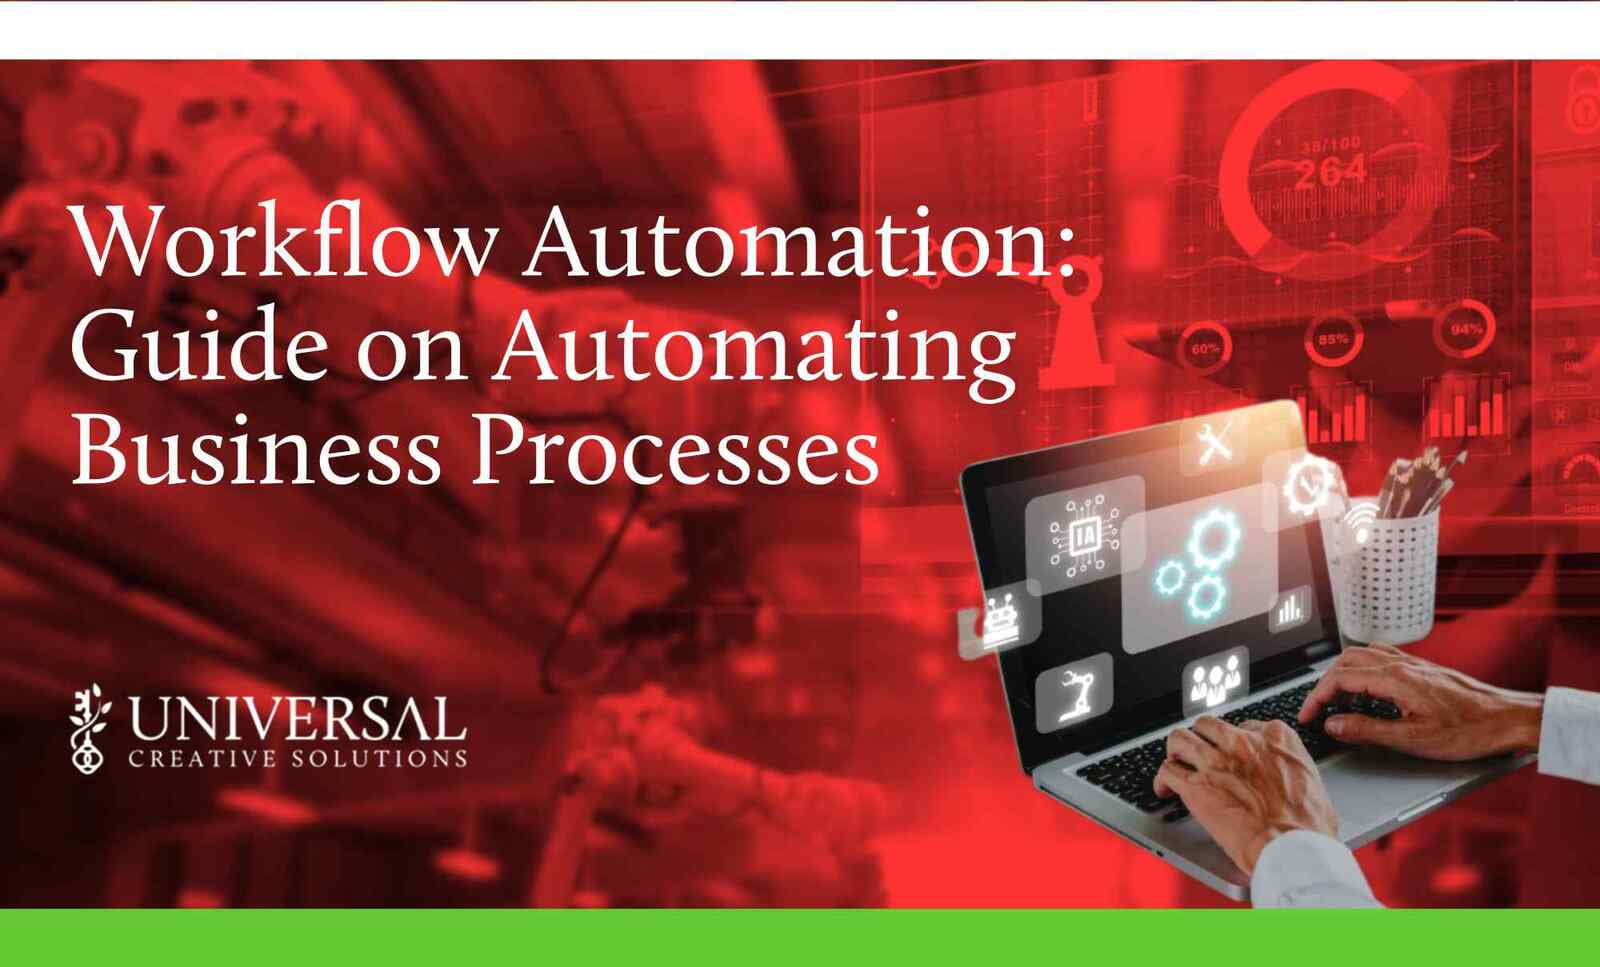 Workflow Automation: Guide on Automating Business Processes